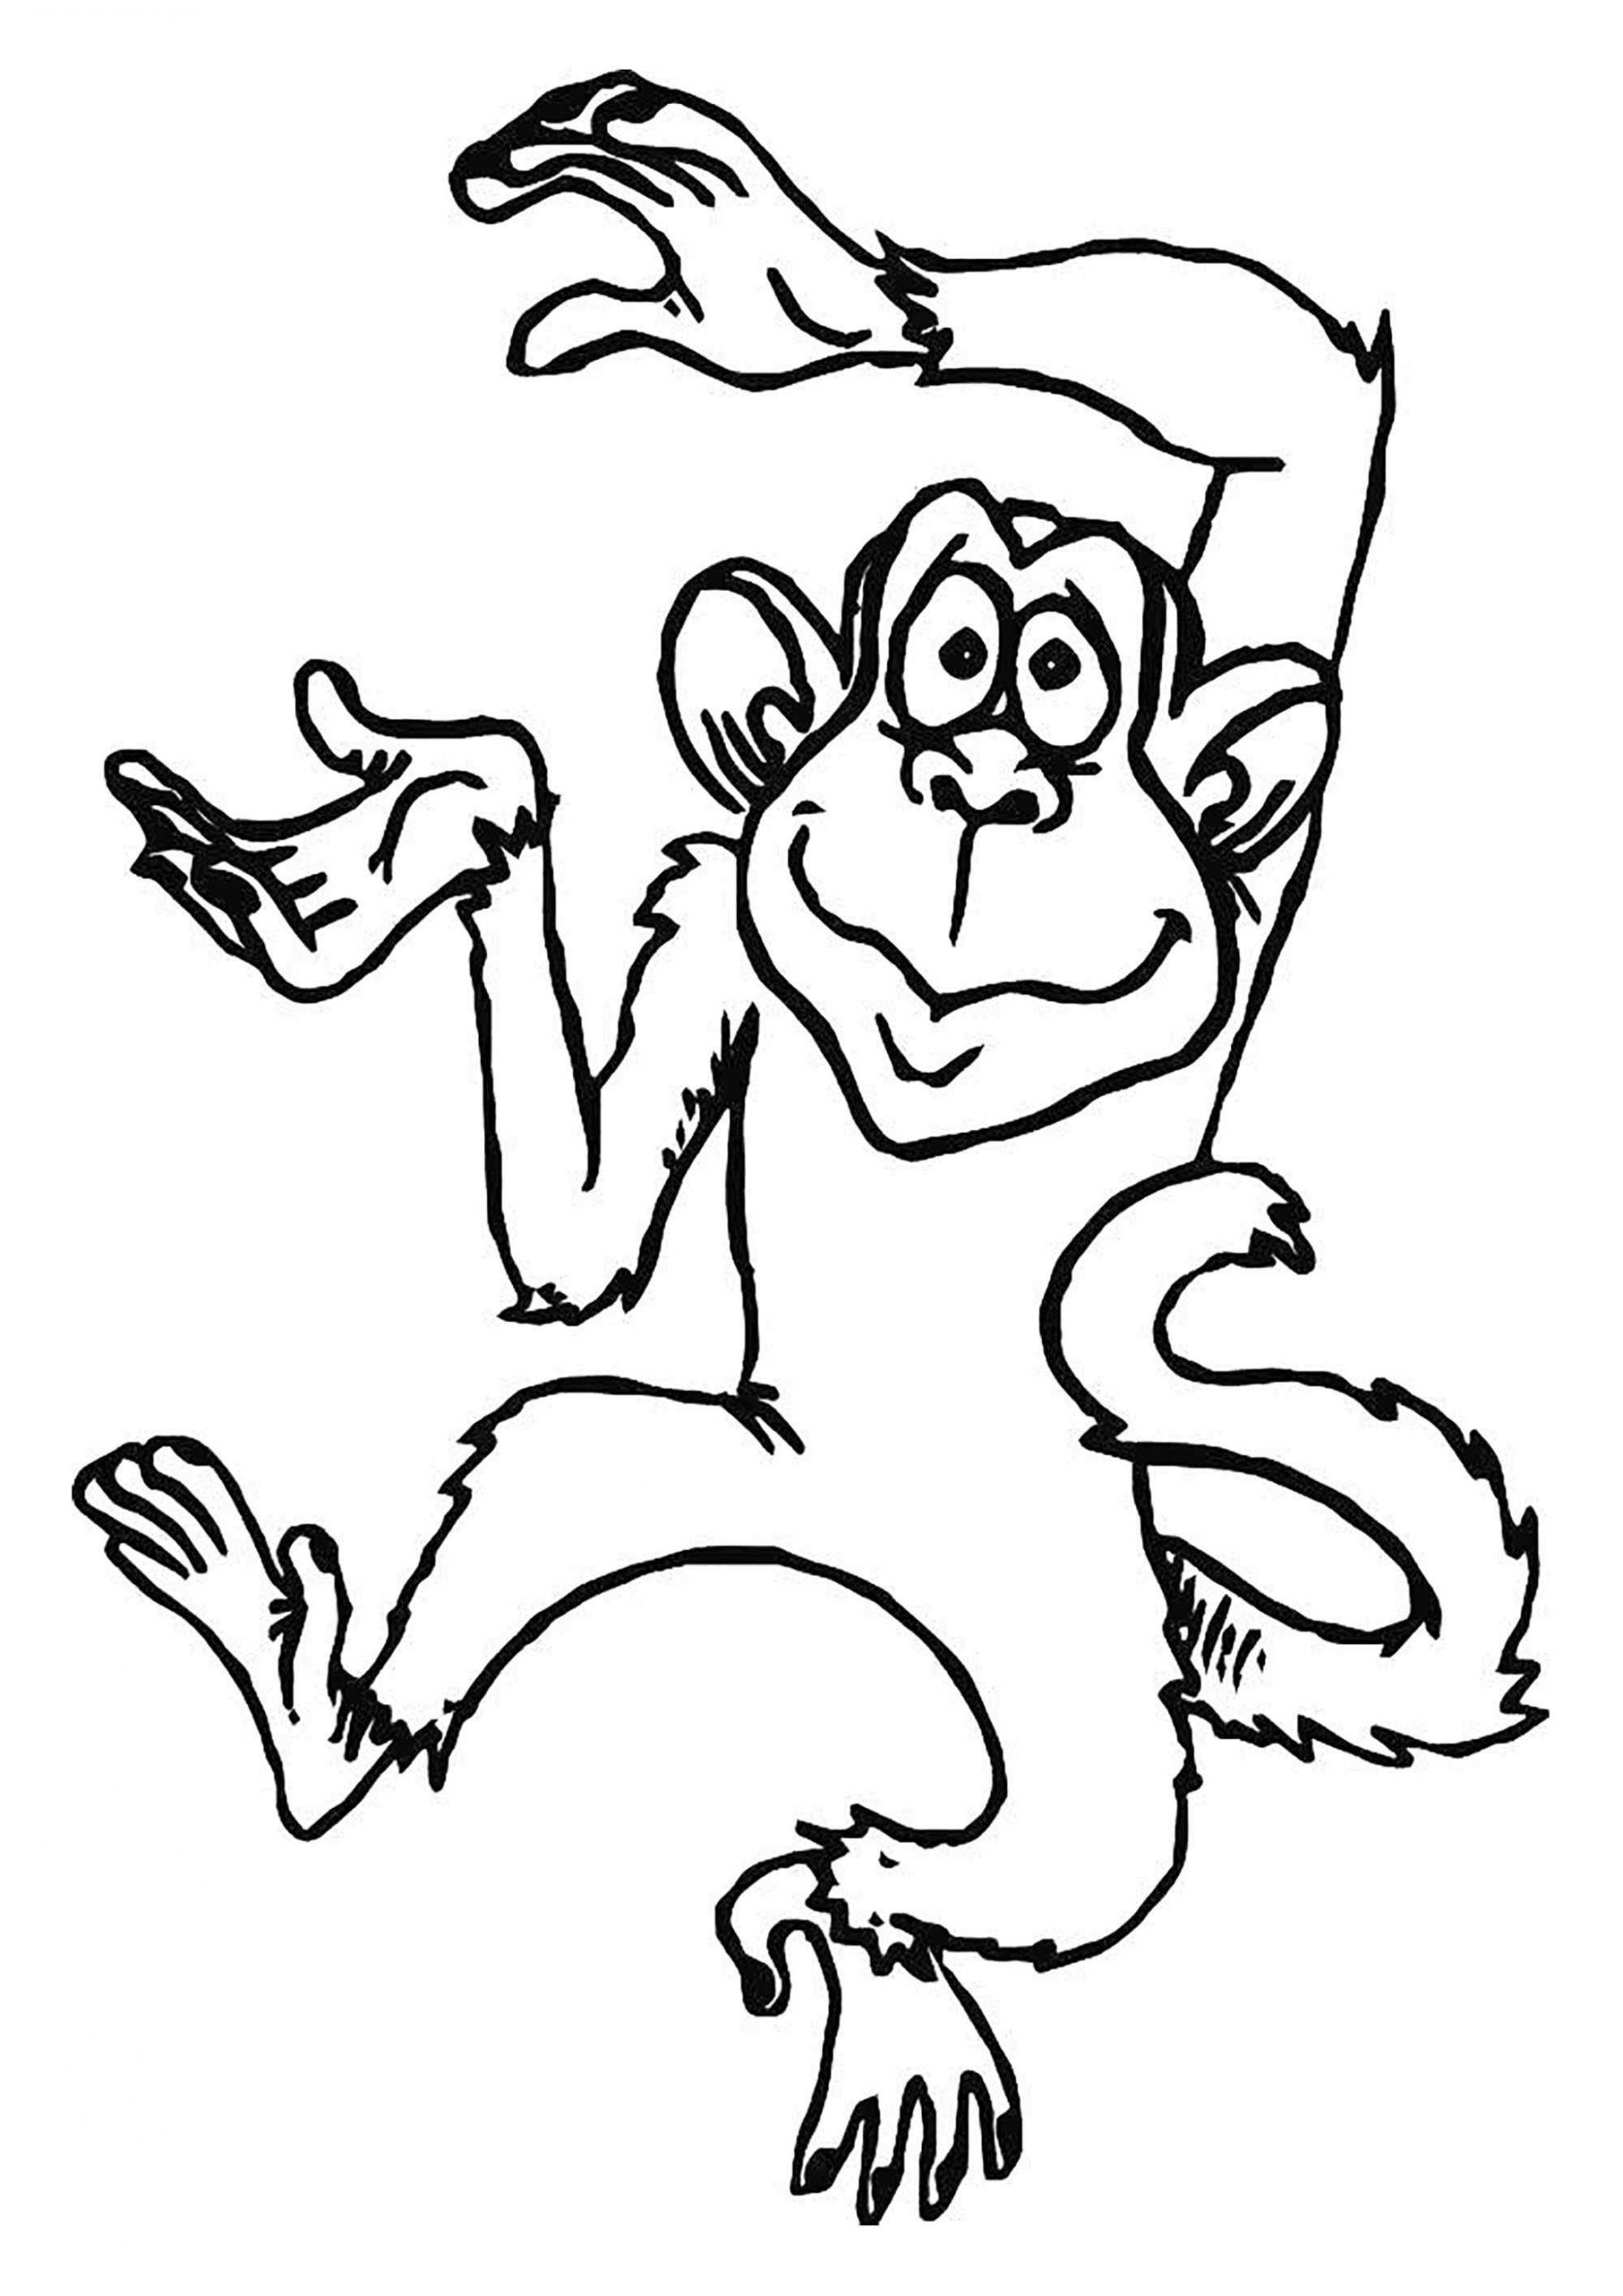 Perfect Monkey For Kids Coloring Page